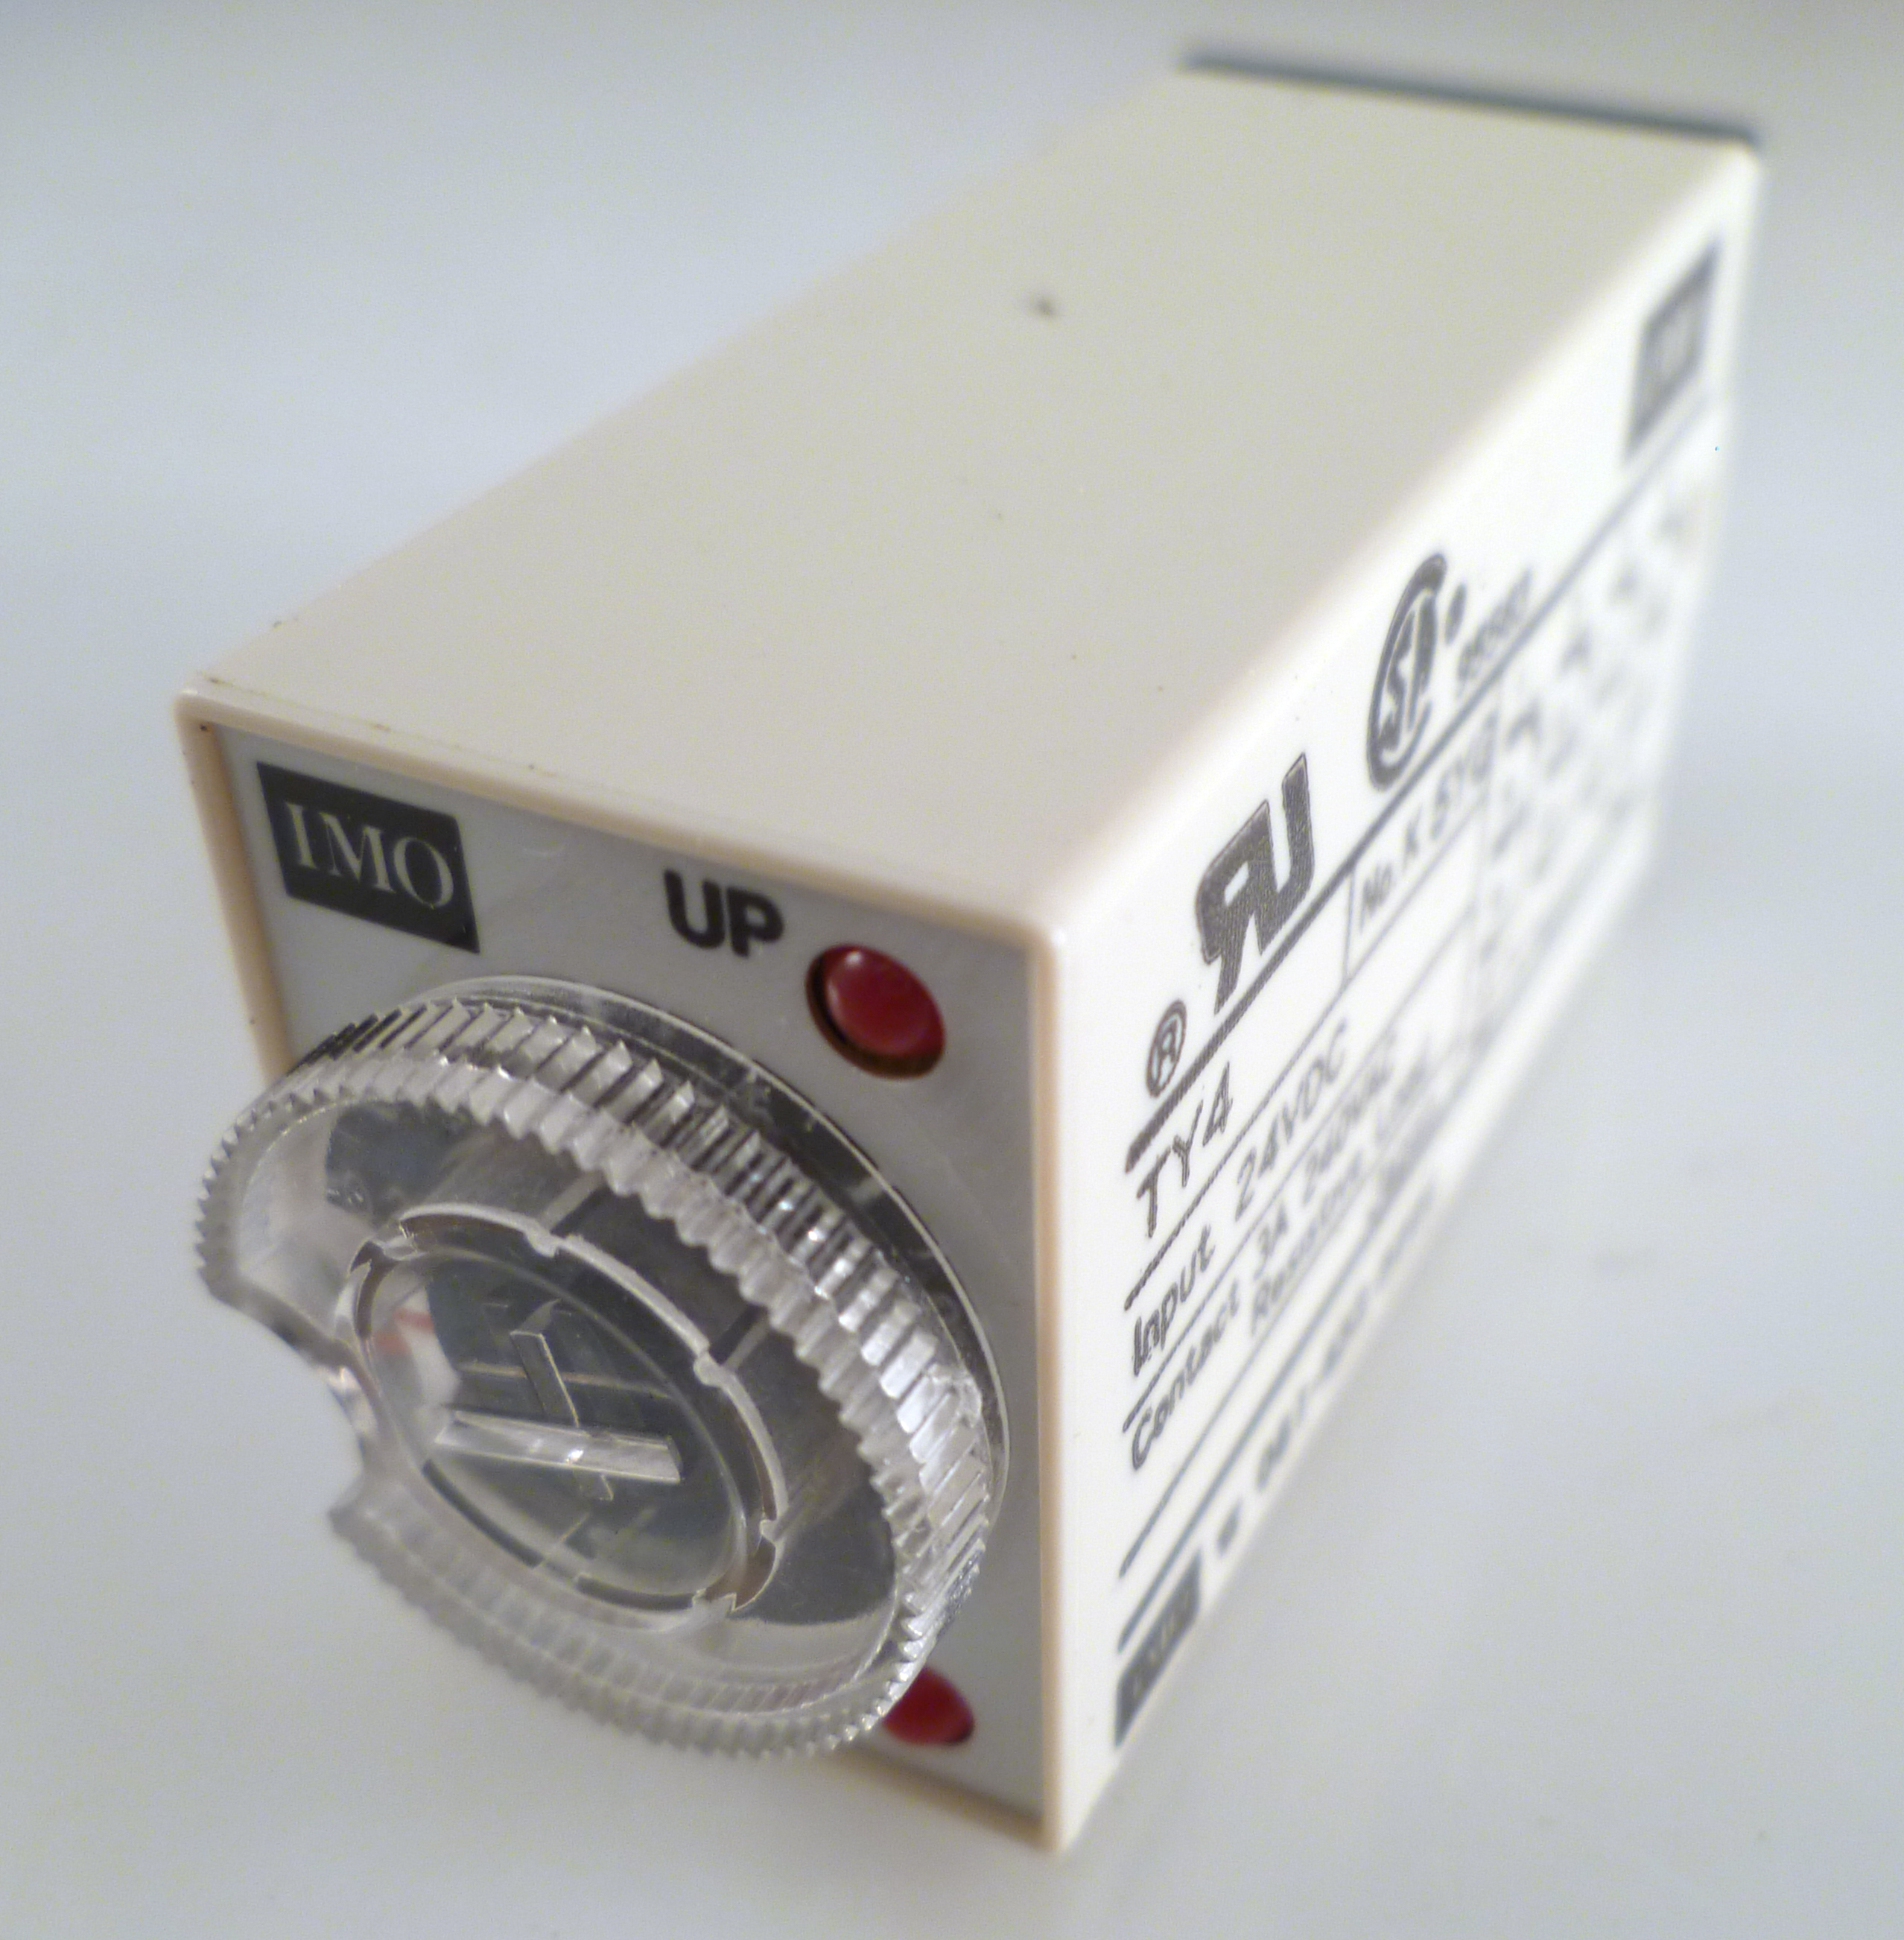 IMO TY-4 24V AC 10 Seconds  Timer relay 4 pole 14 pin 